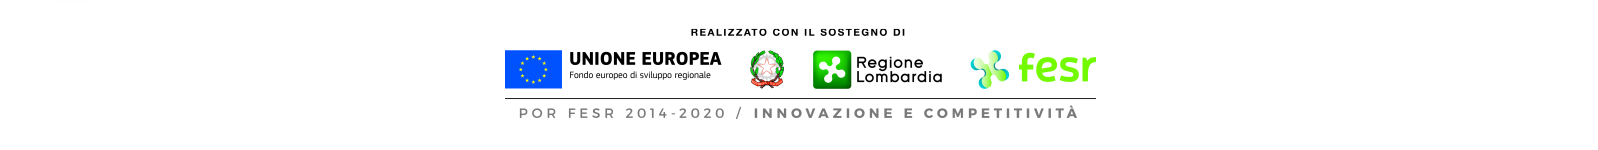 Realized with the support of European Union, Lombardy region, city of Milan and FESR